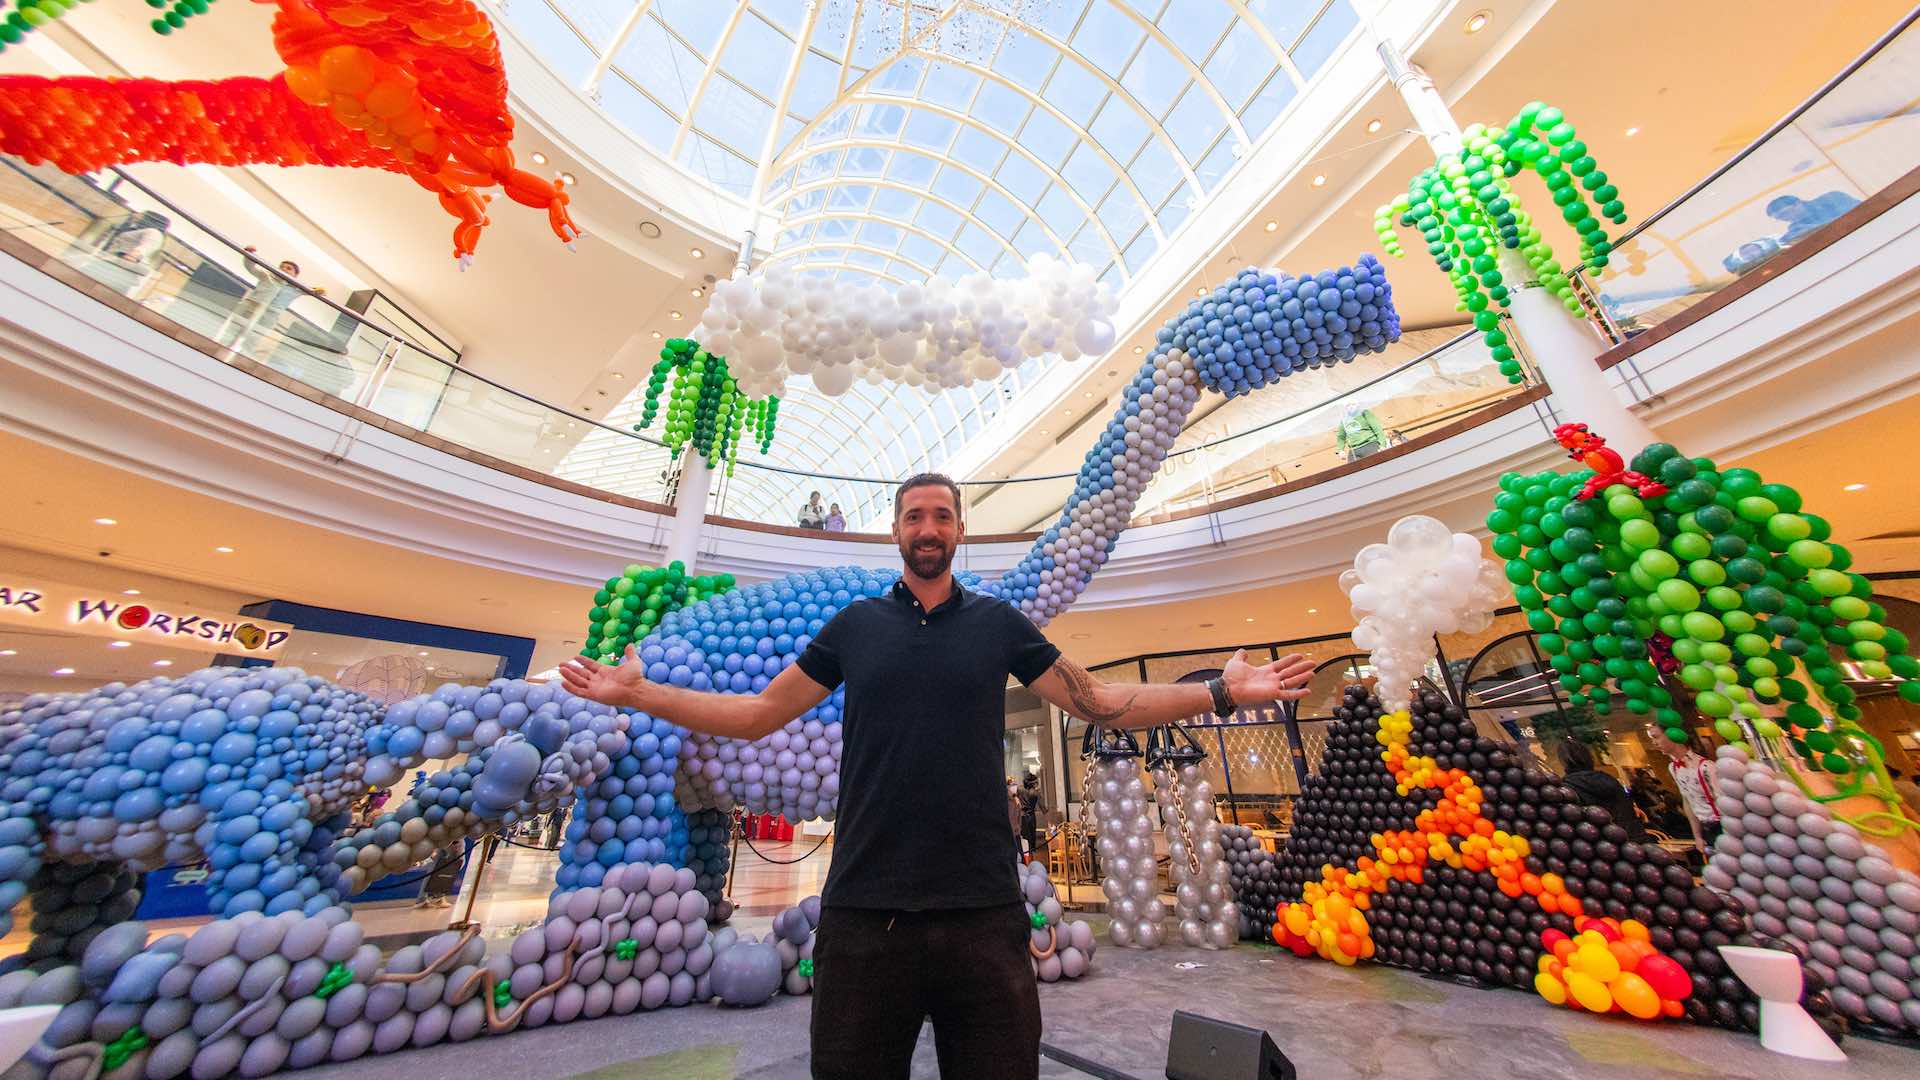 Balloon Art Is On The Rise: World-Renowned Artist Chats About His Largest Work to Date